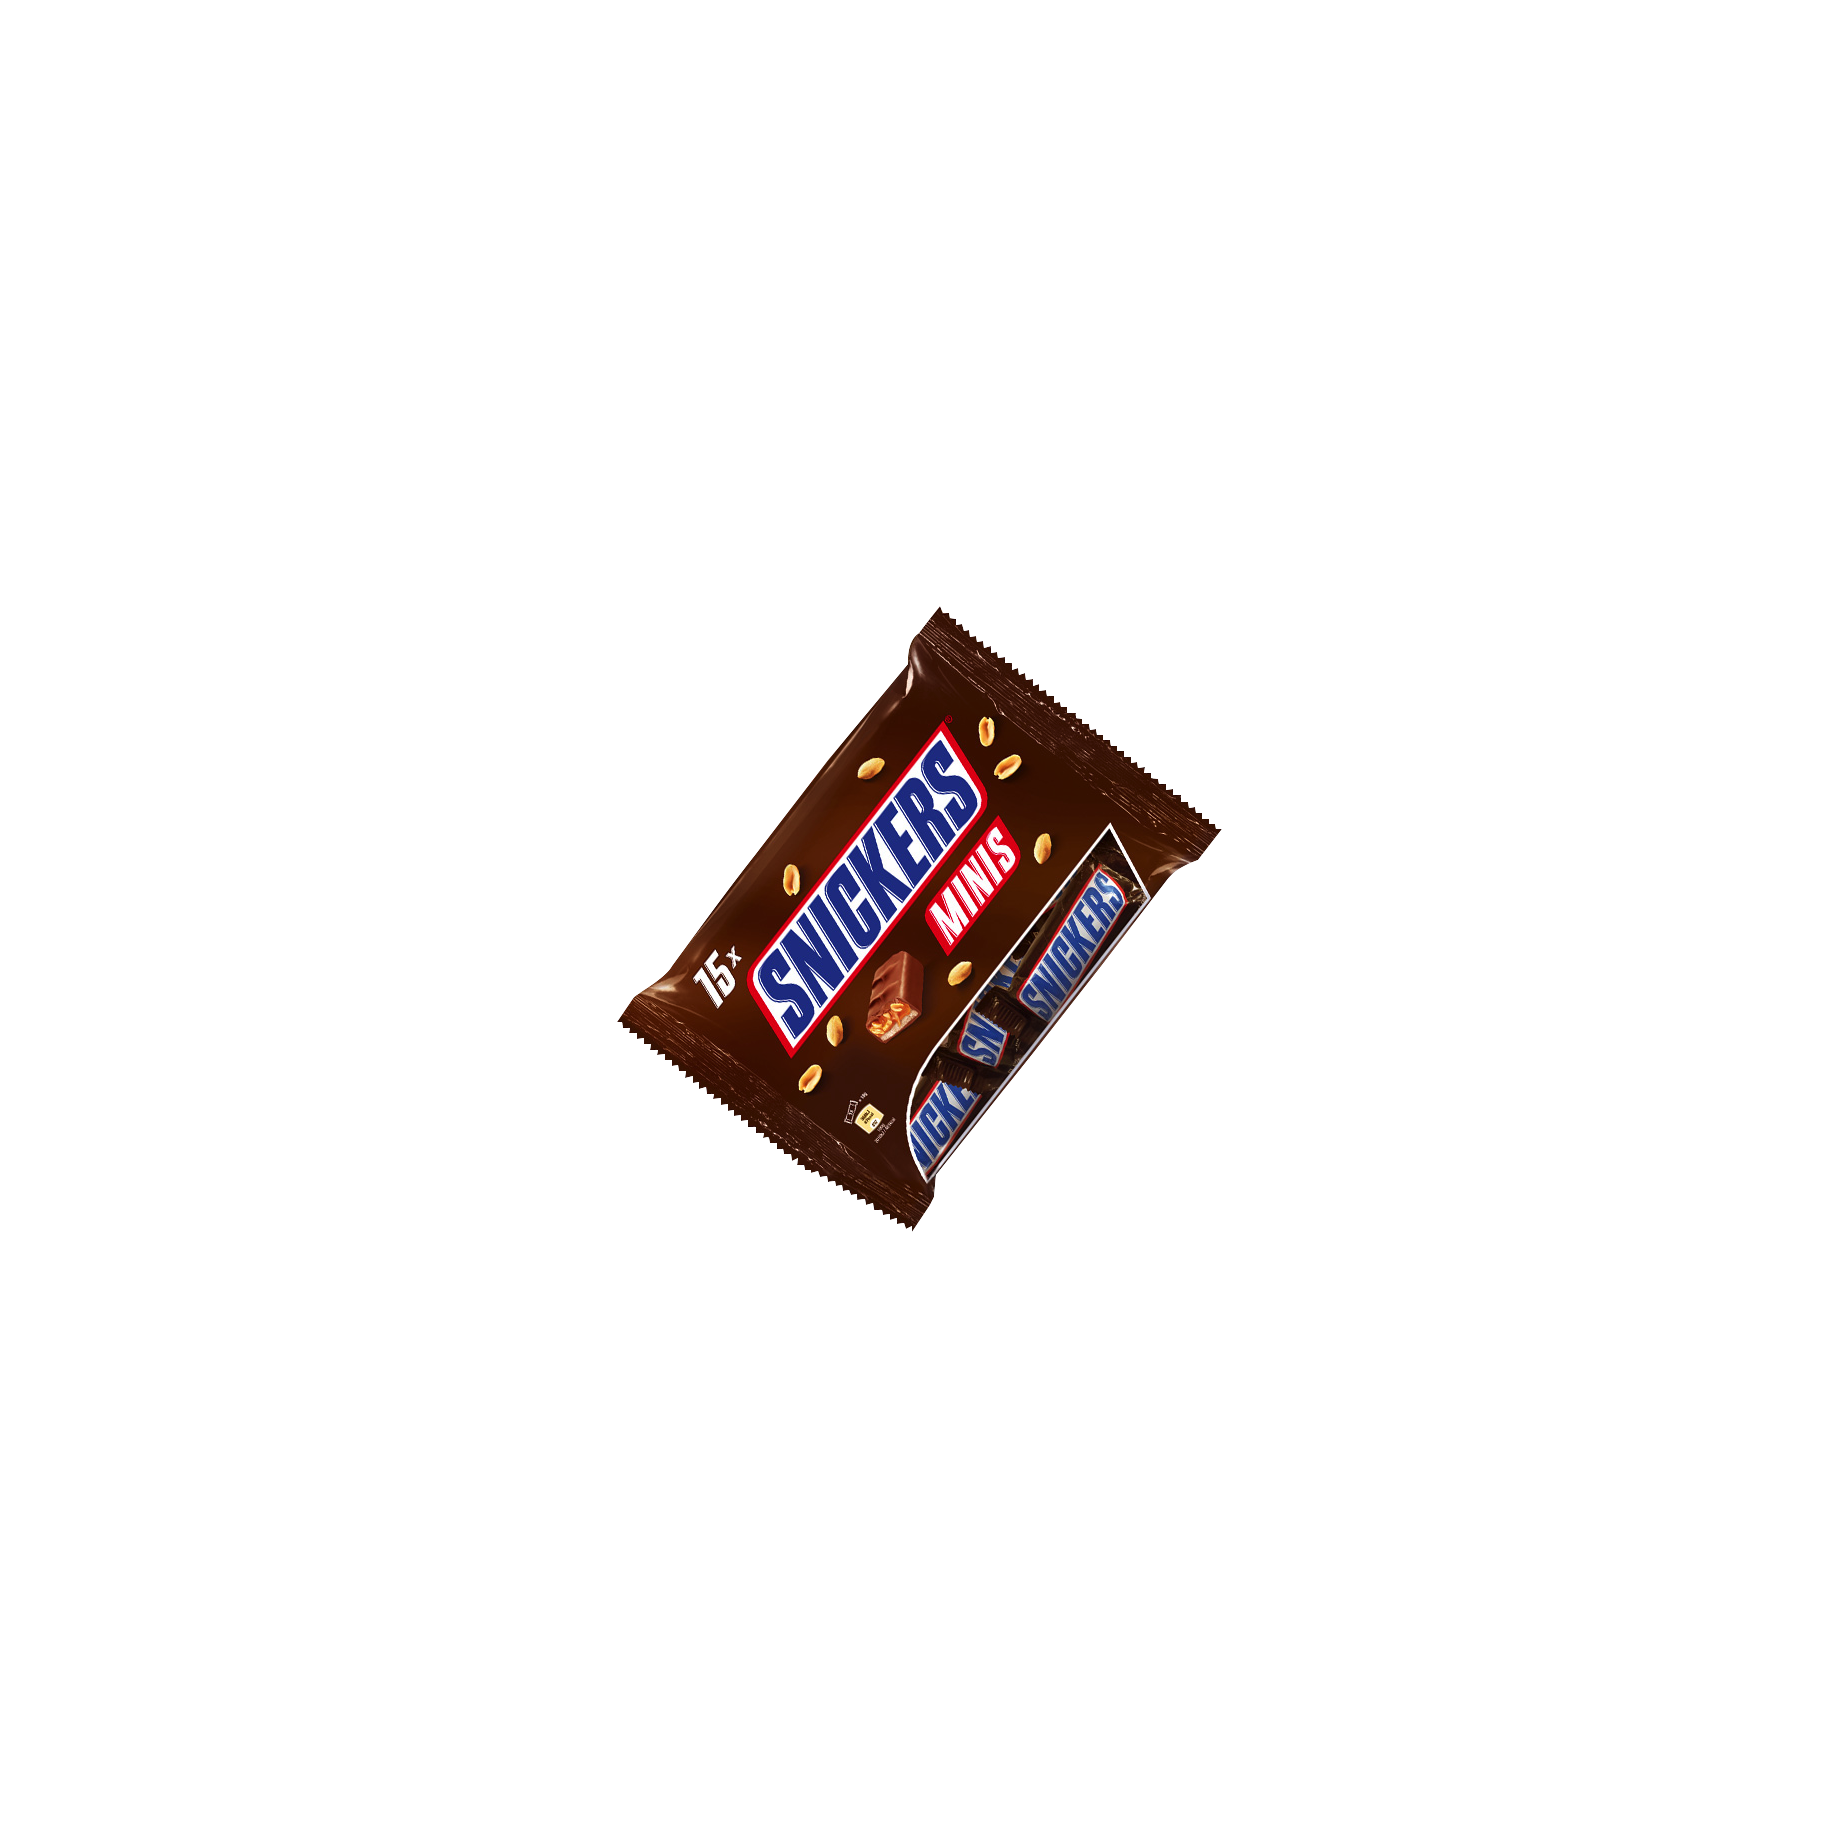 Snickers Minis